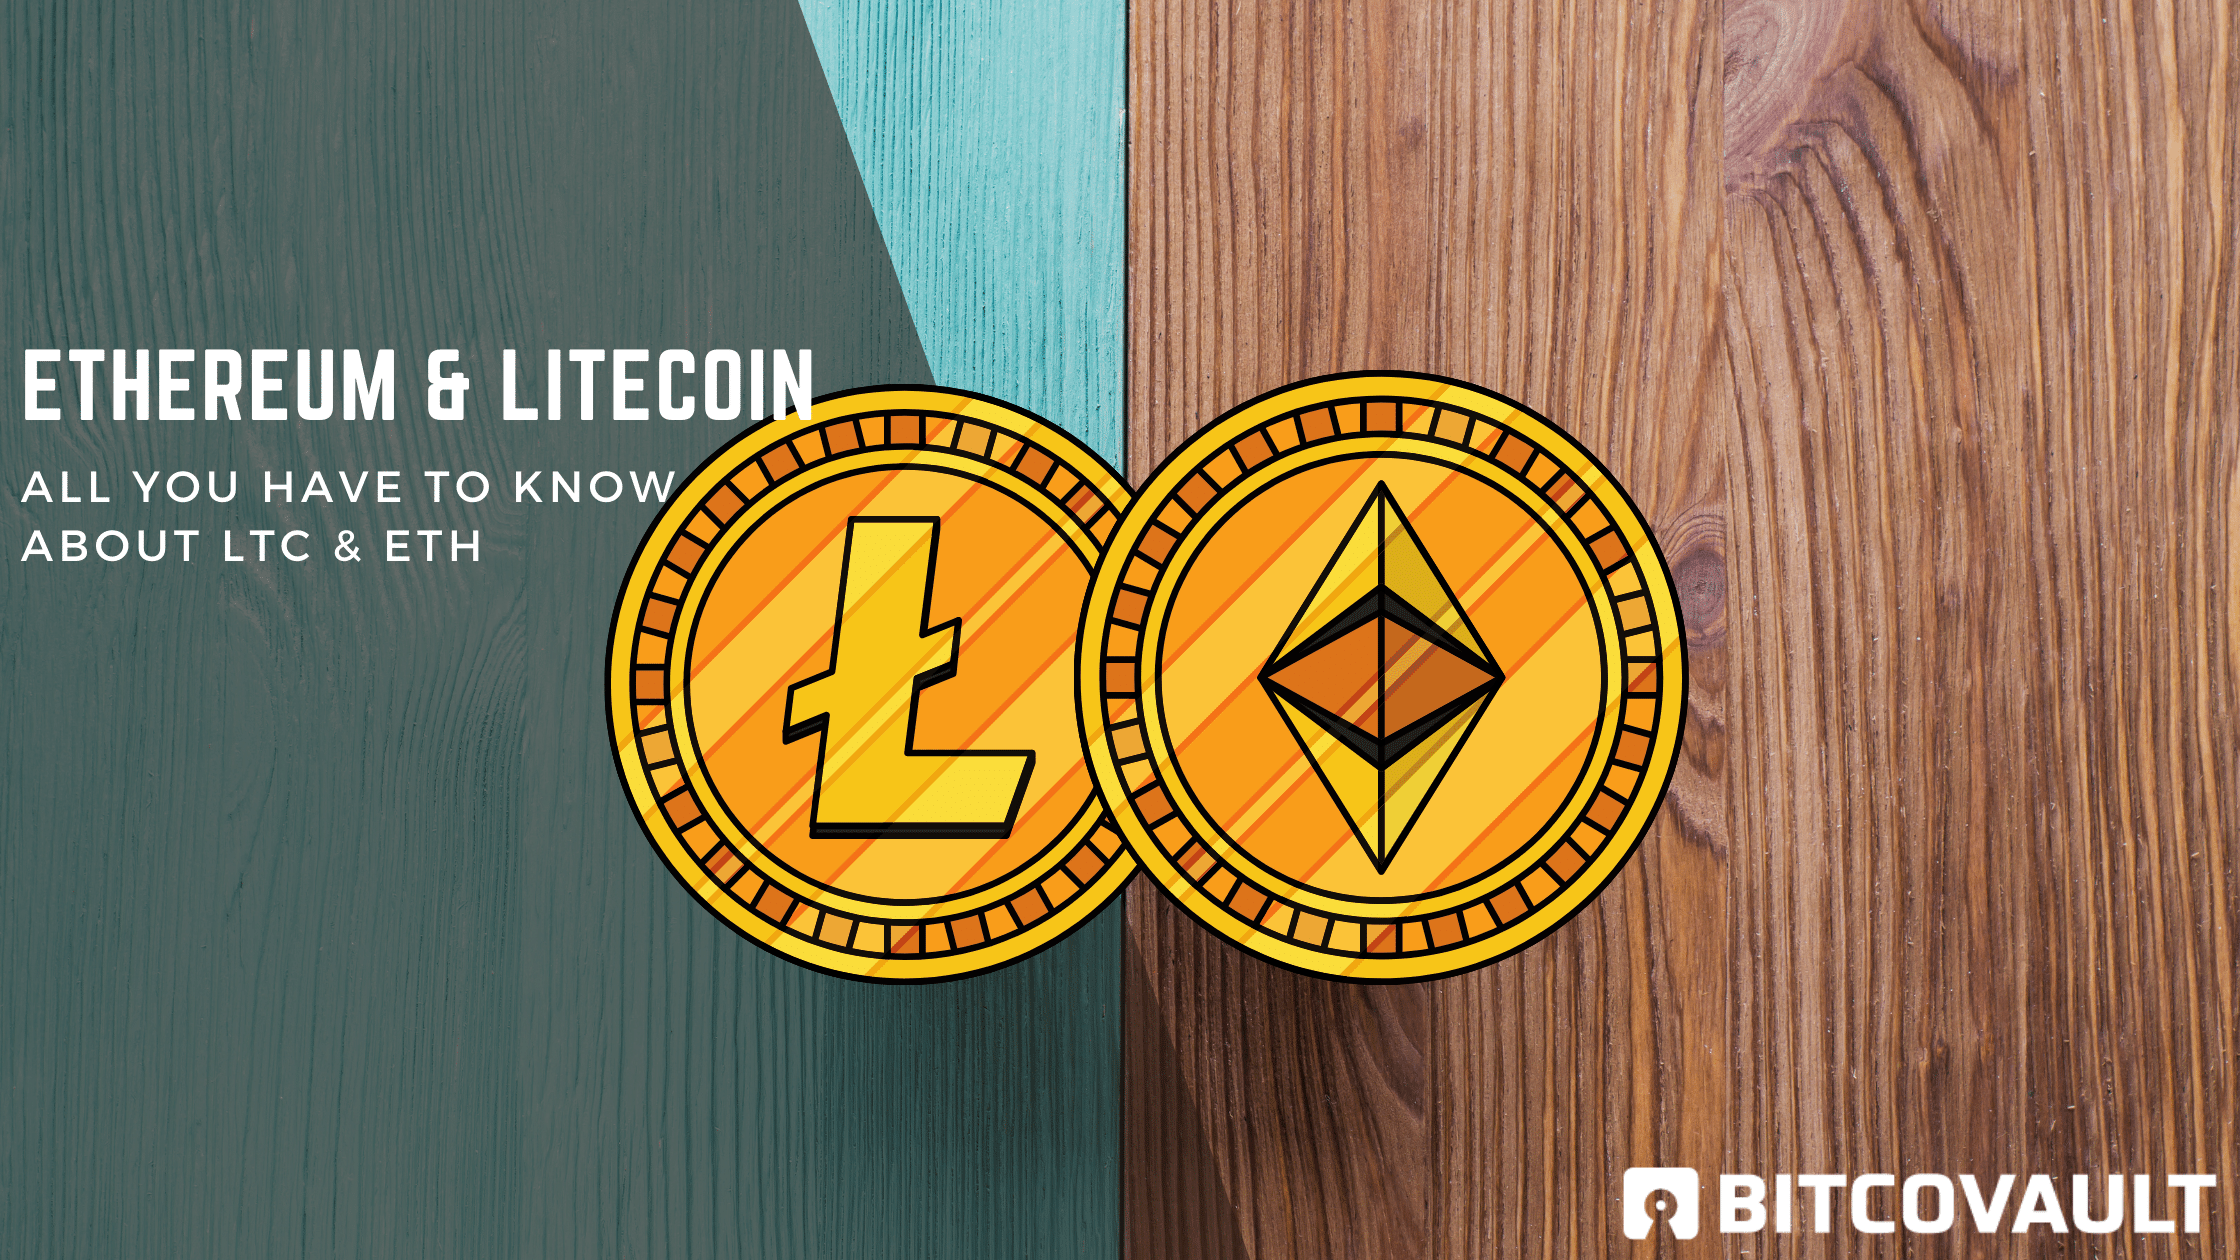 All You Have to Know About Litecoin and Ethereum